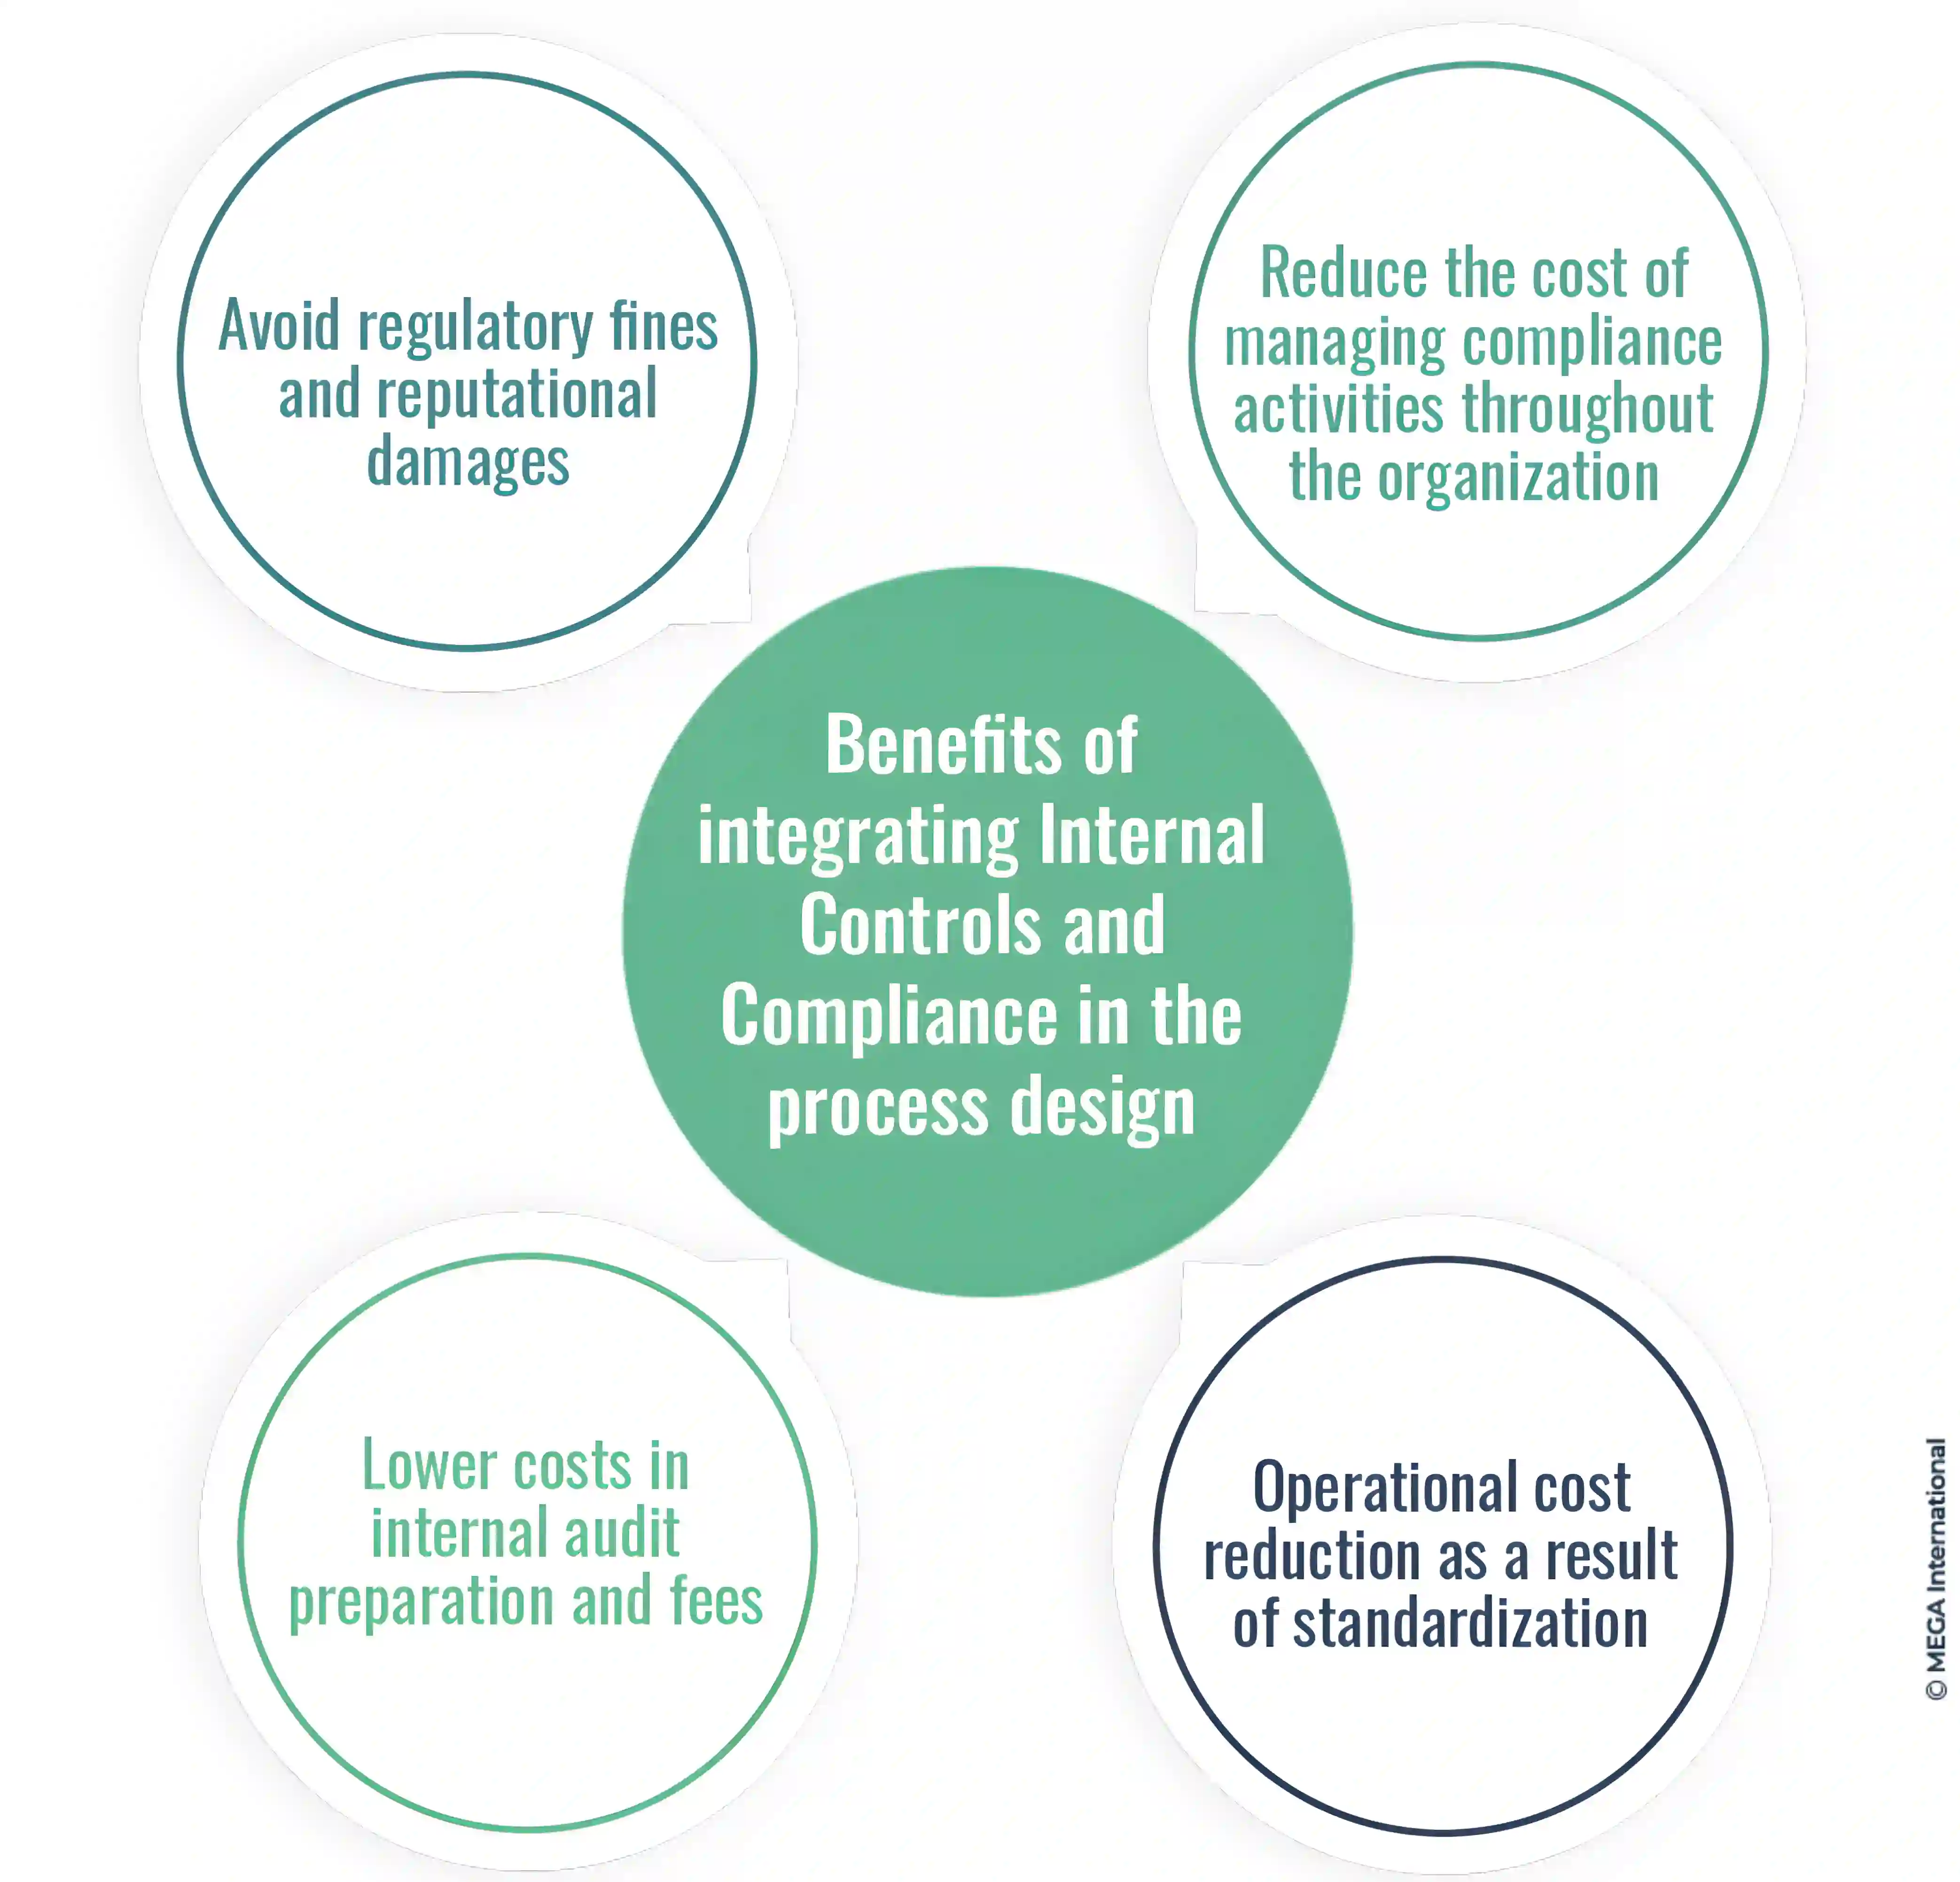 Benefits of integrating integrating internal control and compliance in the process desing